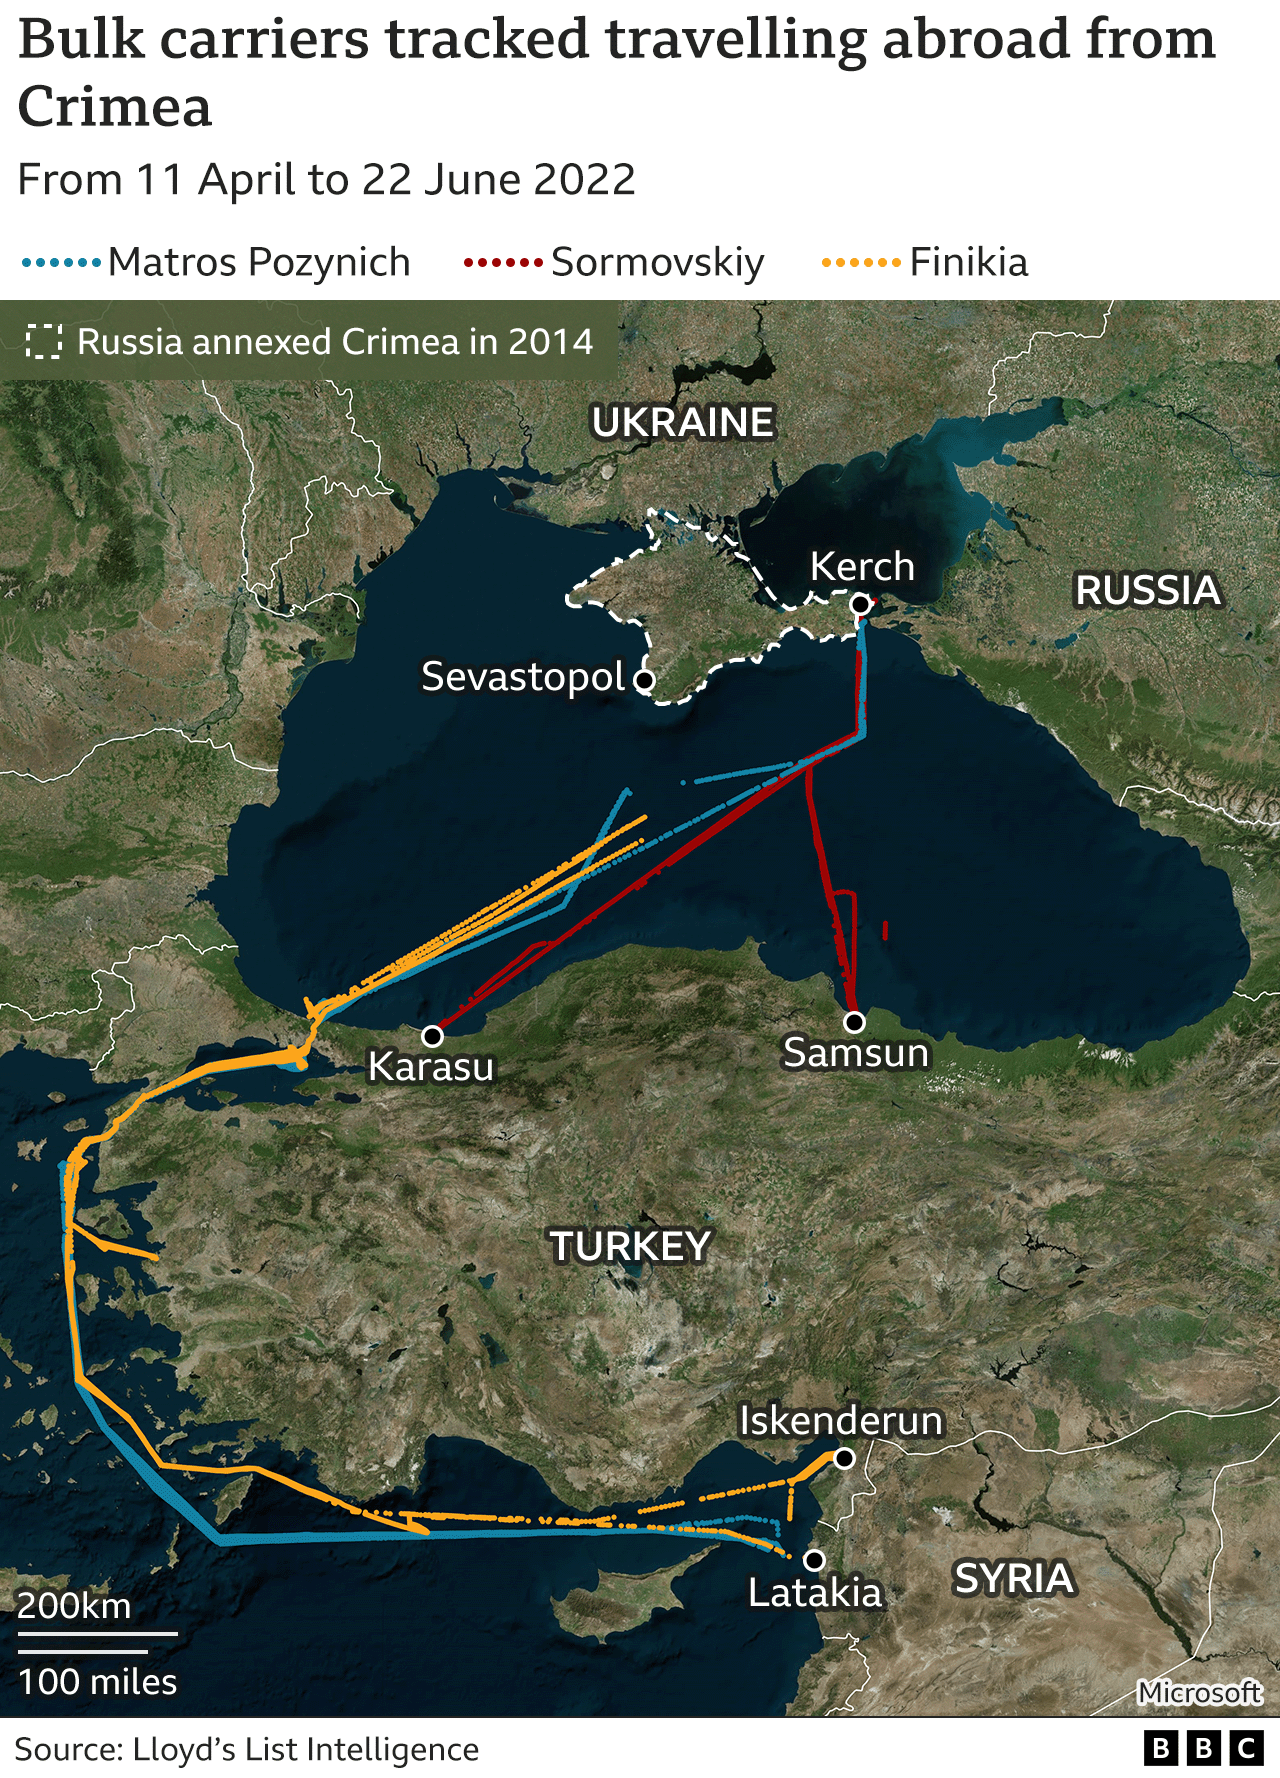 The infographics shows the routes of russian and Syrian vessels carrying the grain allegedly stolen from Ukraine